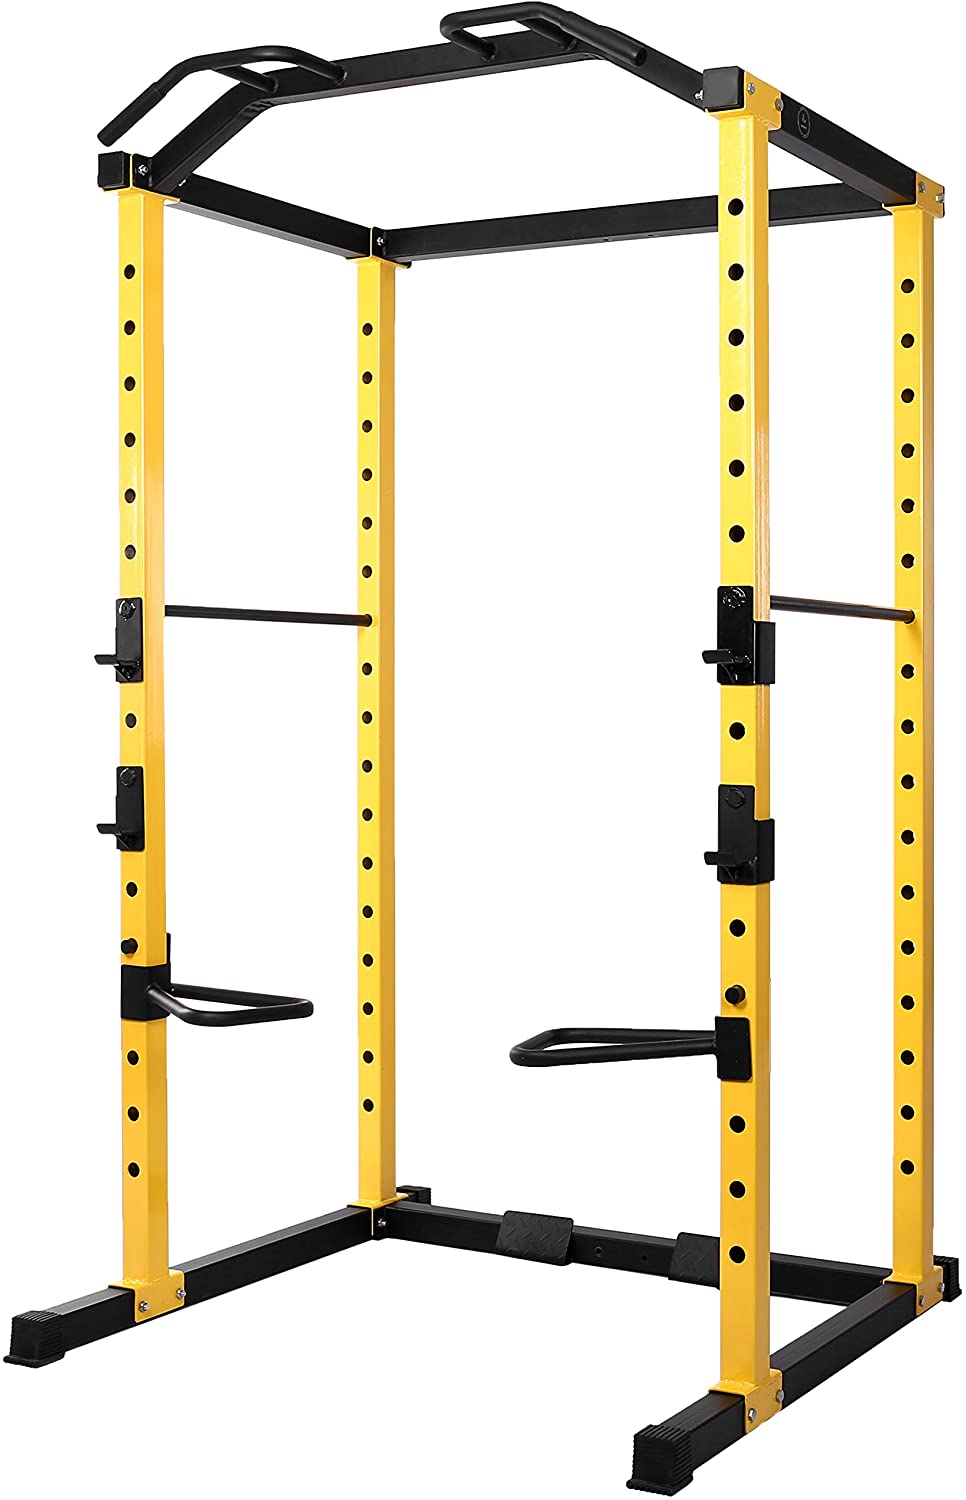 HulkFit 1000-Pound Capacity Multi-Function Adjustable Power Cage with J-Hooks and Dip Bars, Power Cage Only - image 1 of 3